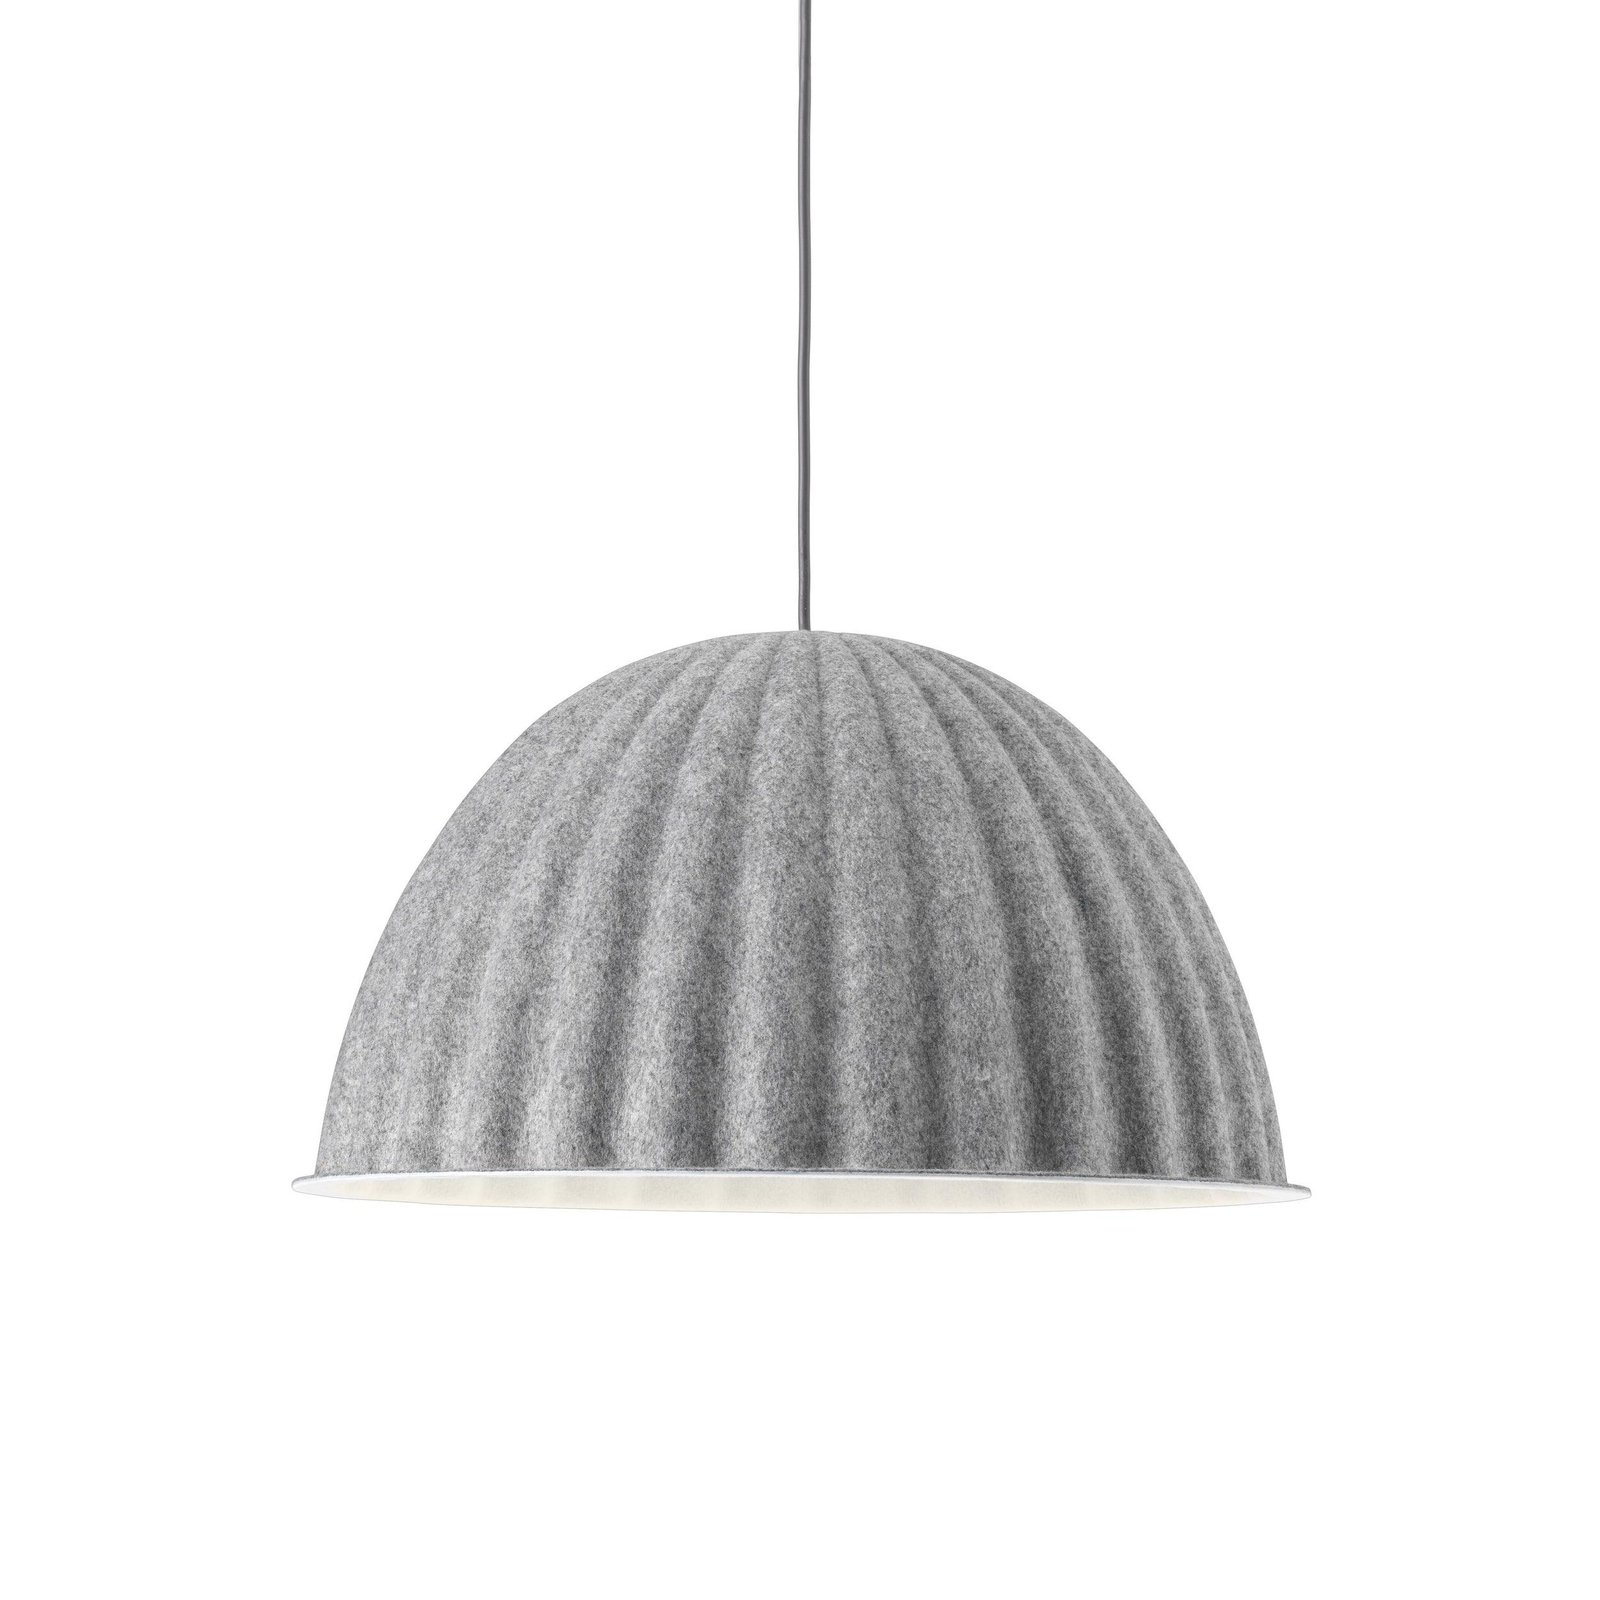 Grey Under The Bell Pendant Lamp with a diameter of 21.7 inches and a height of 11.8 inches (or 55cm x 30cm).